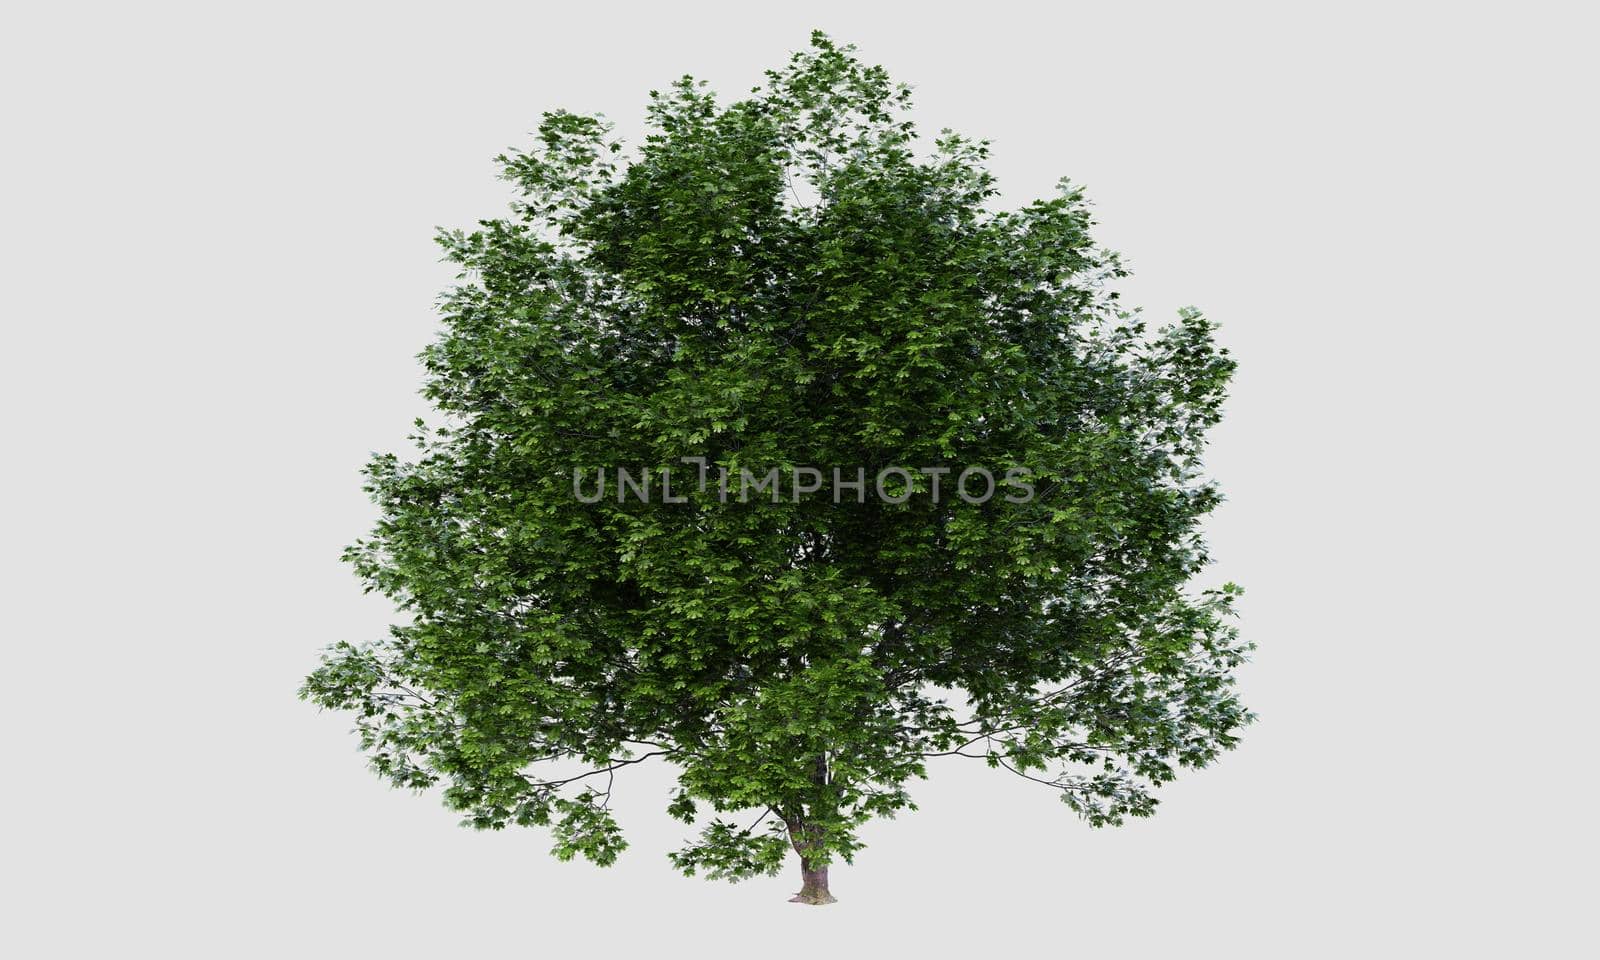 Big Acer marcophillum tree on isolated white background. Nature and object concept. 3D illustration rendering